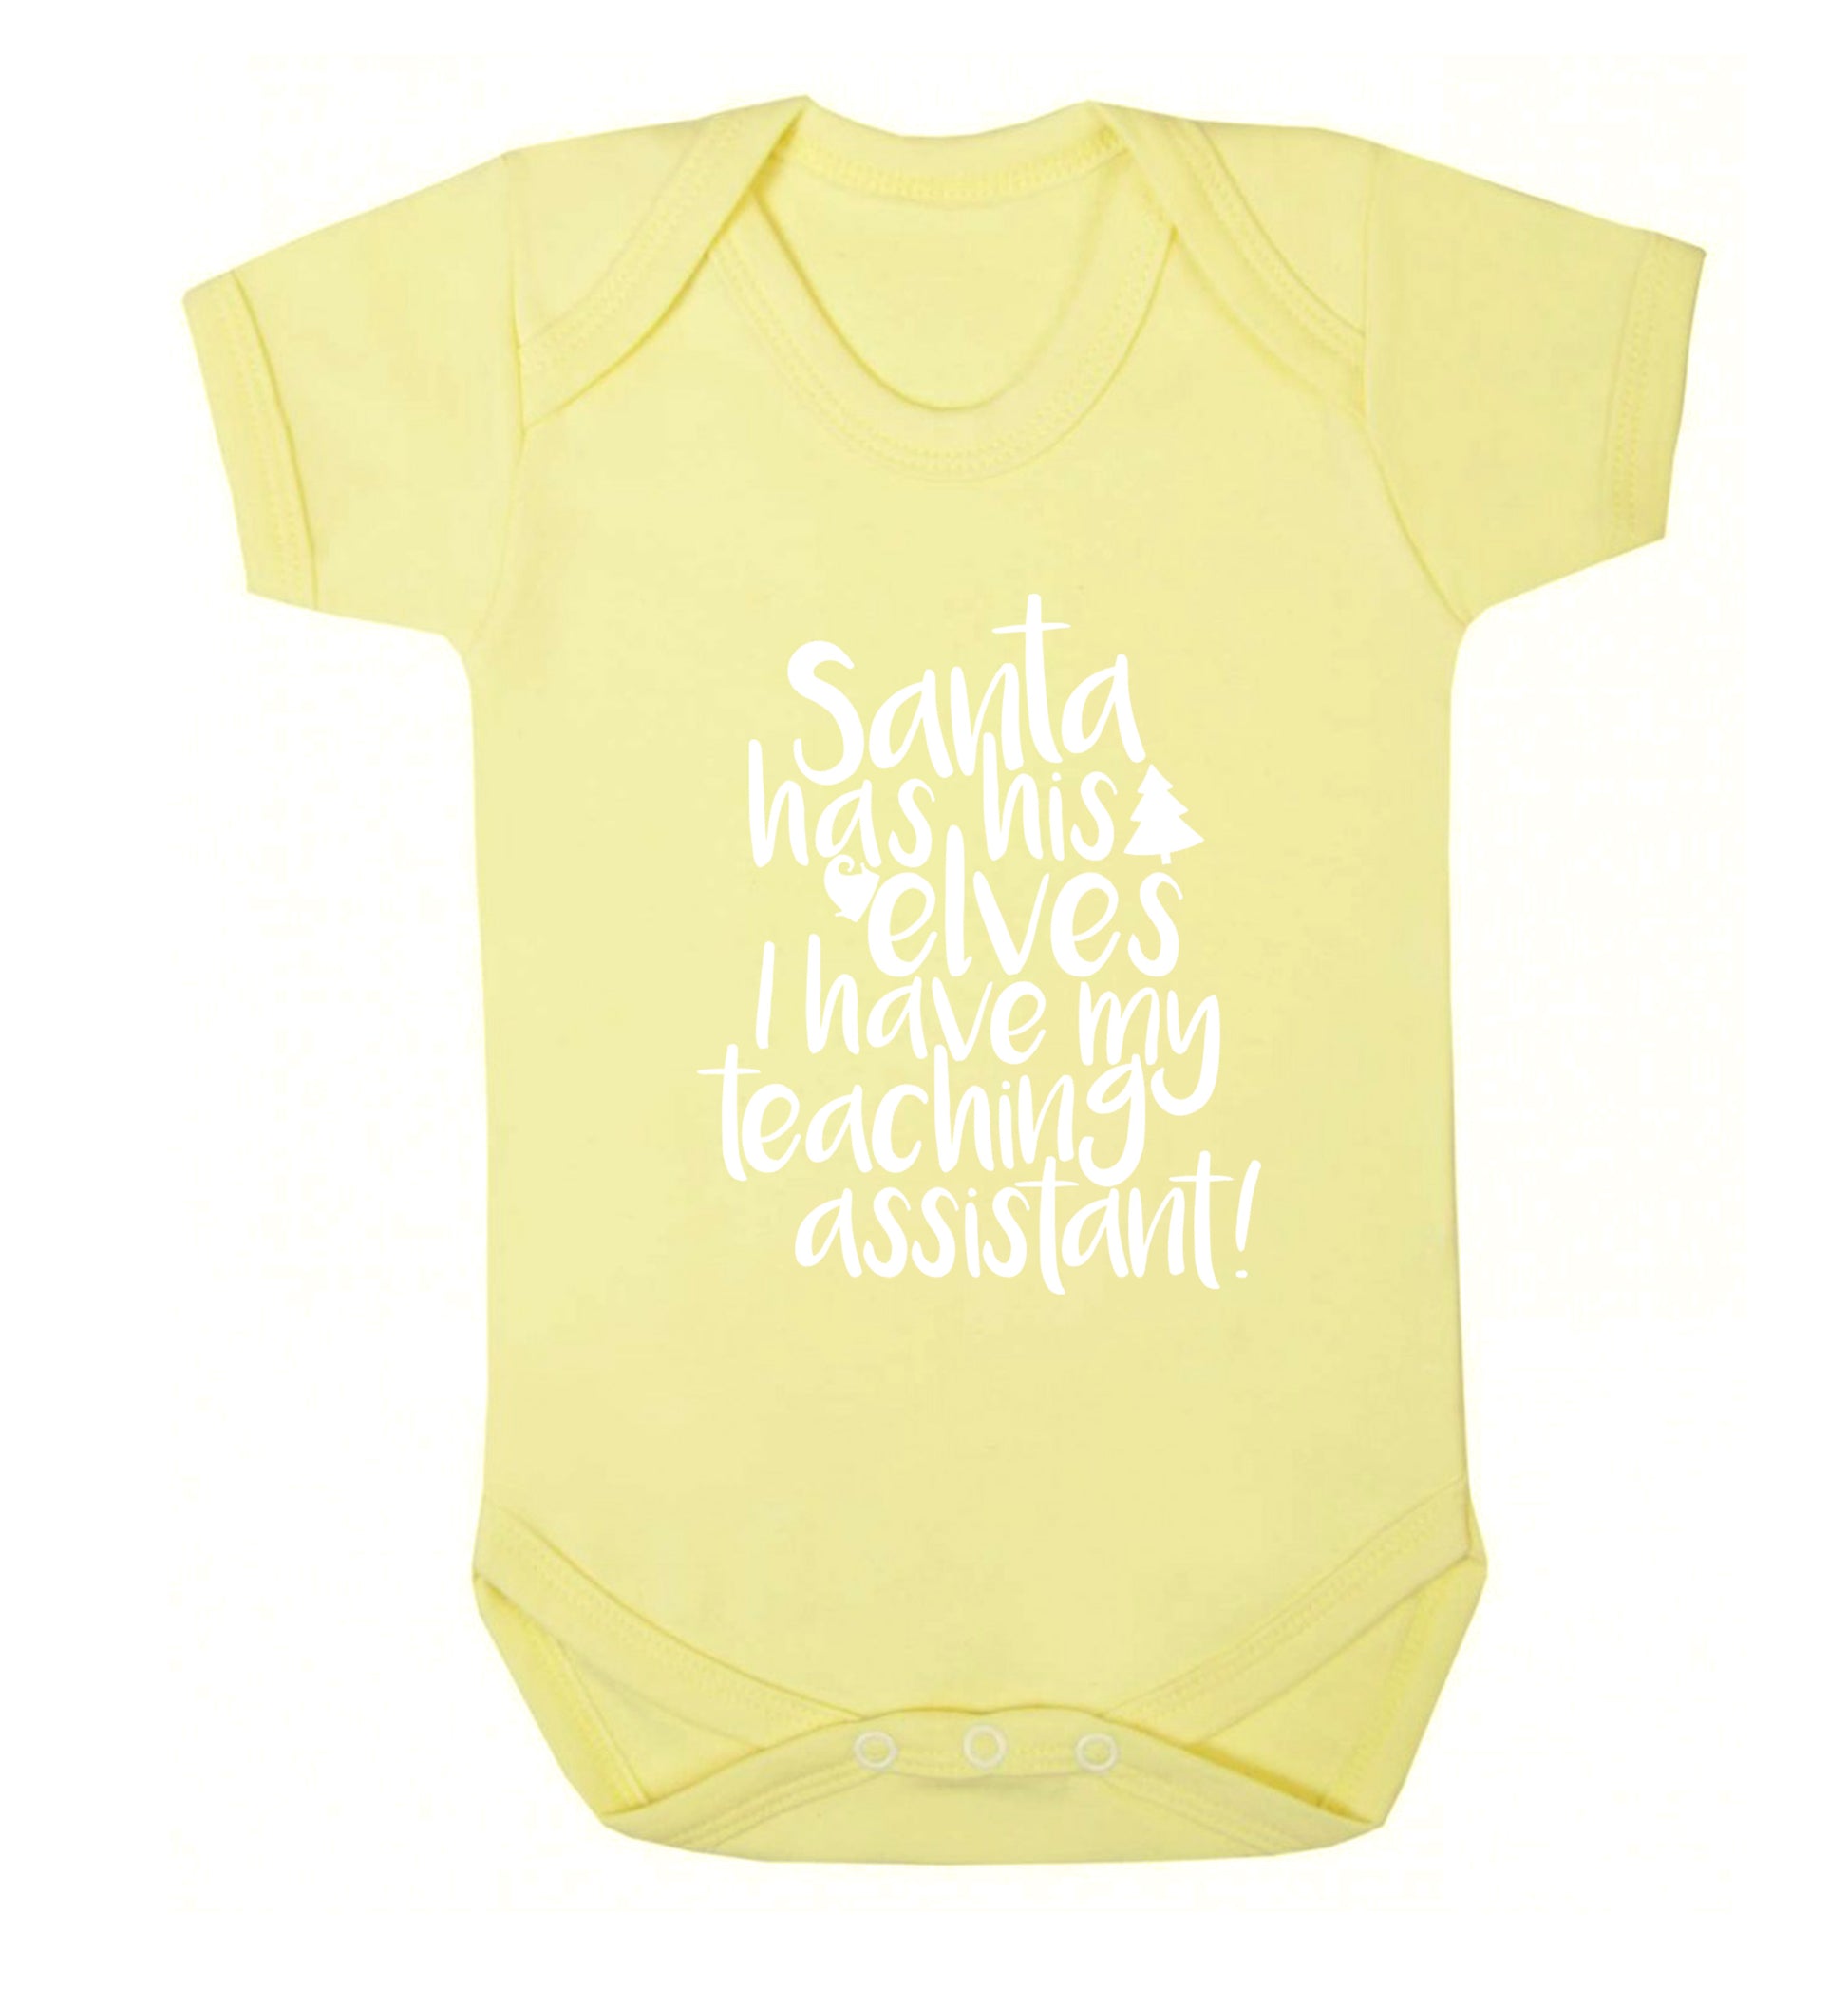 Santa has his elves I have my teaching assistant Baby Vest pale yellow 18-24 months